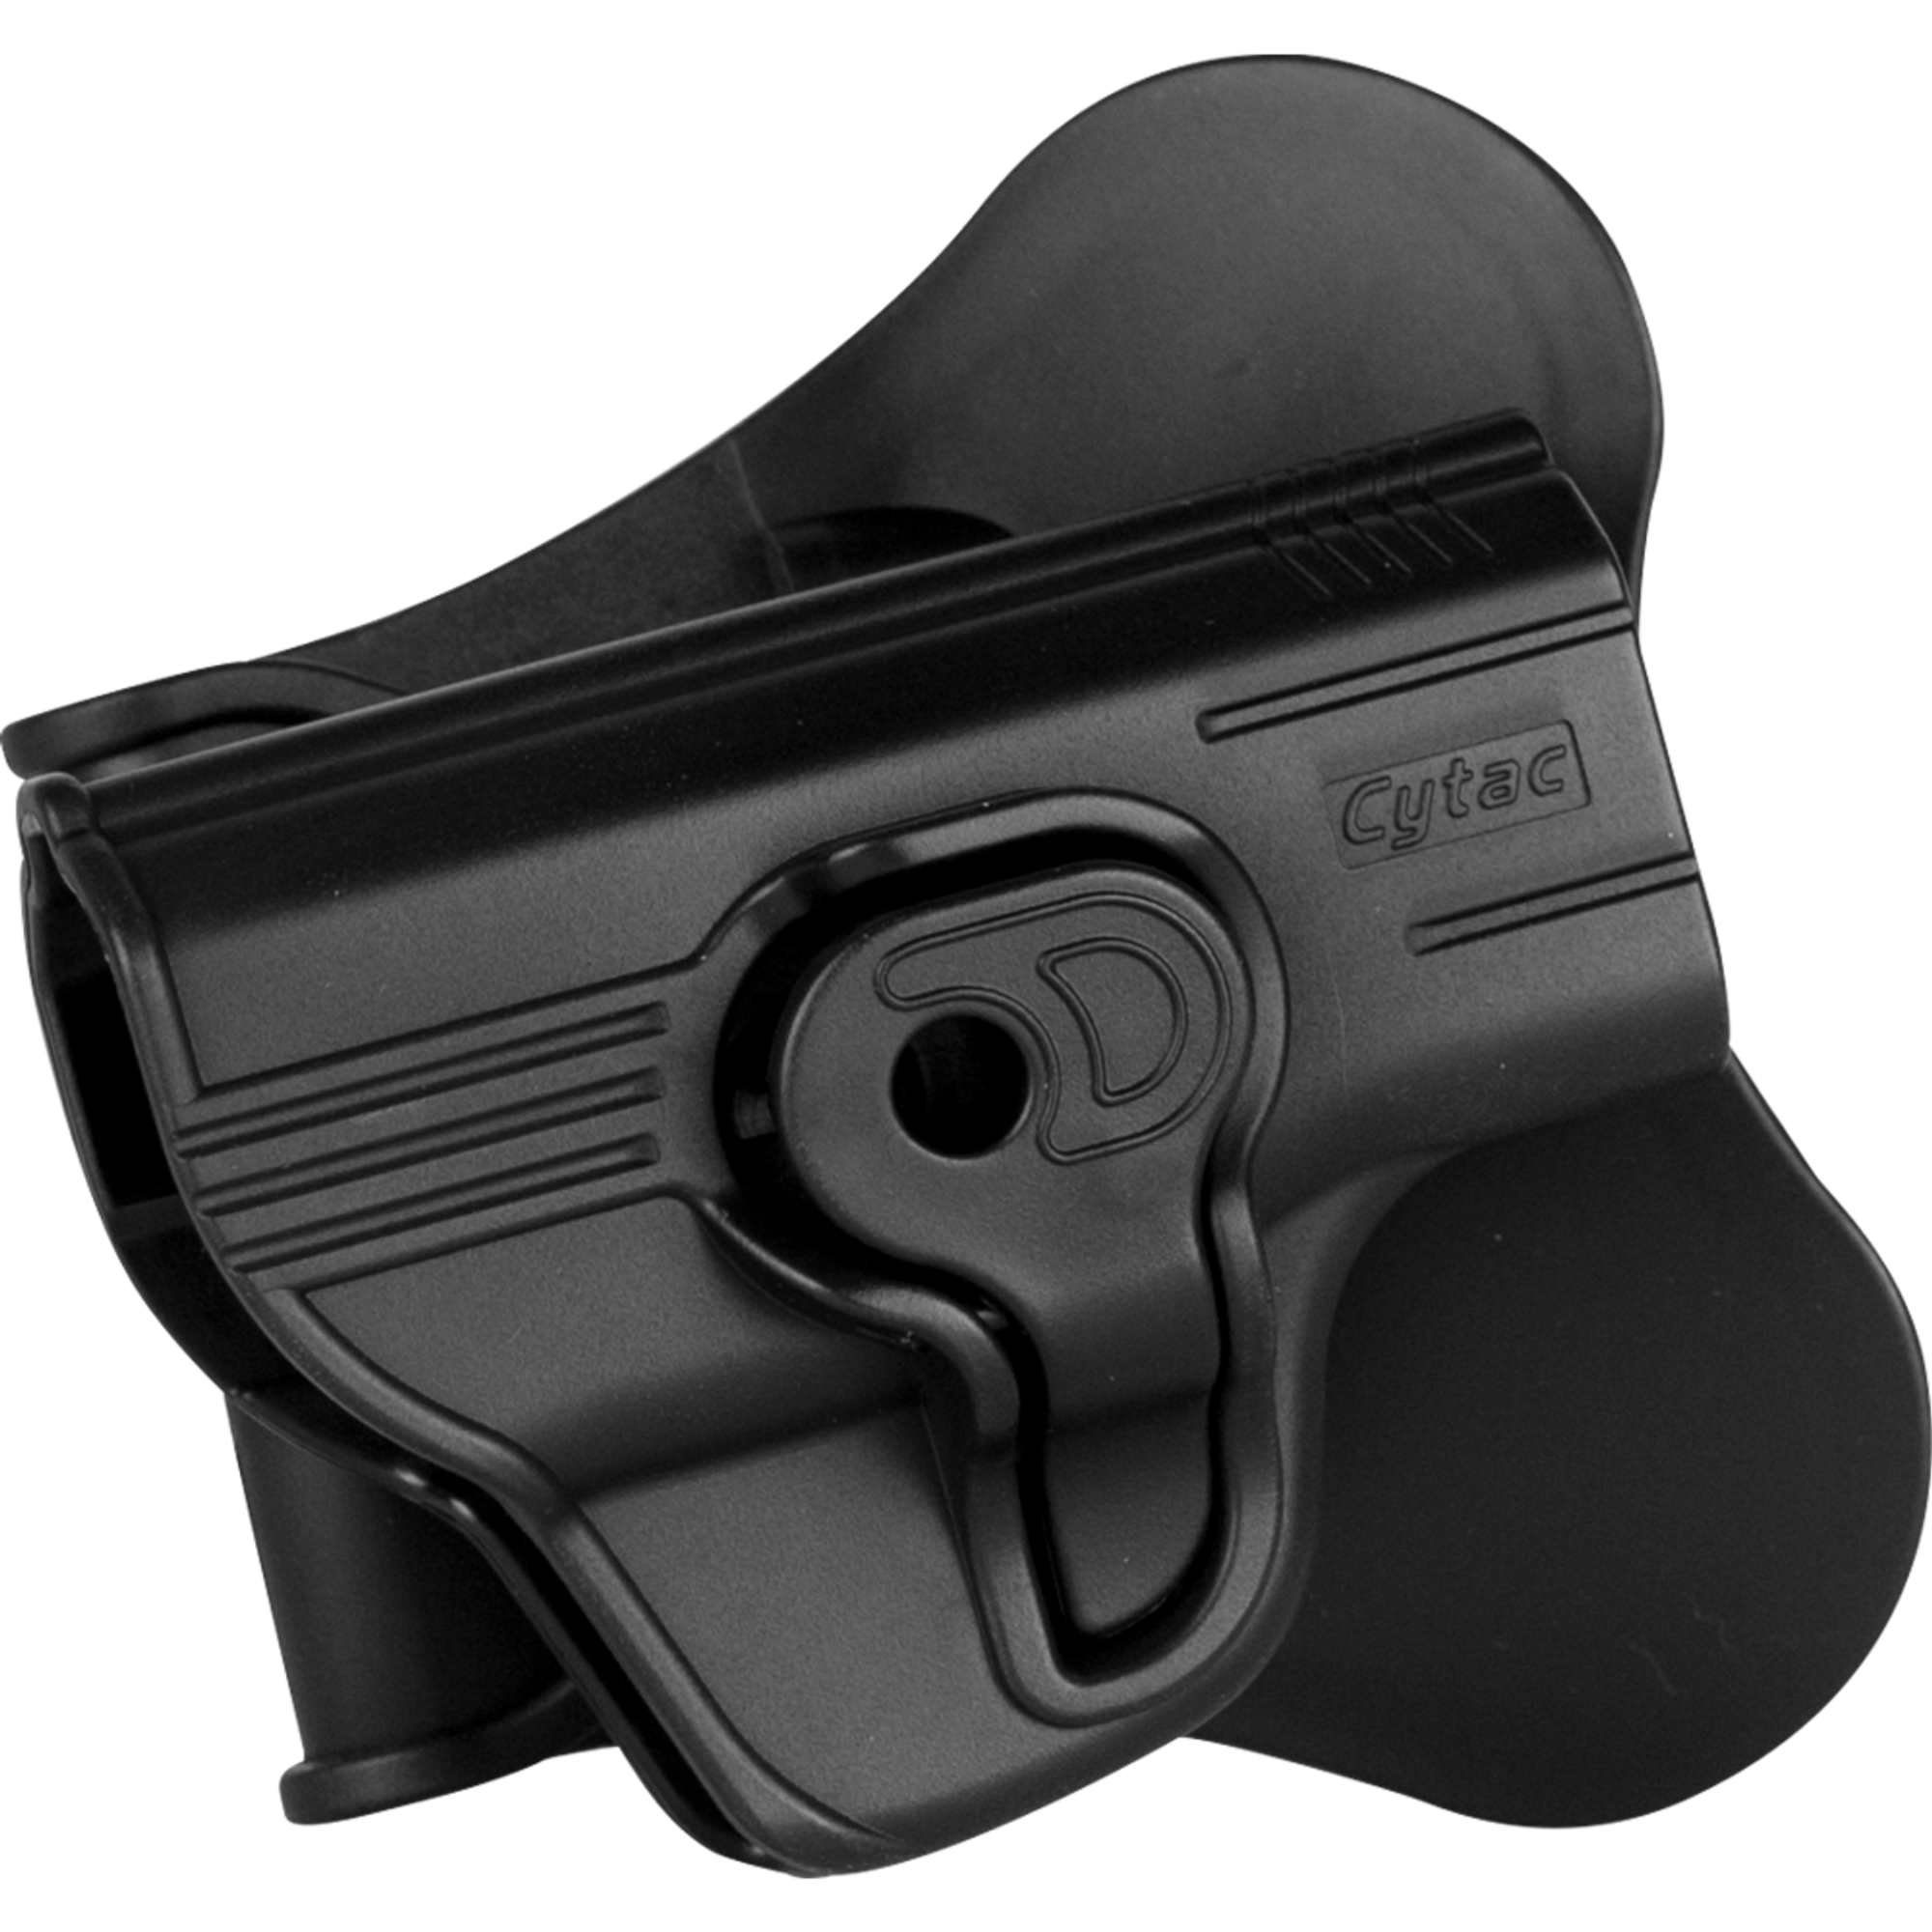 Cytac Ruger Lc9 Holster